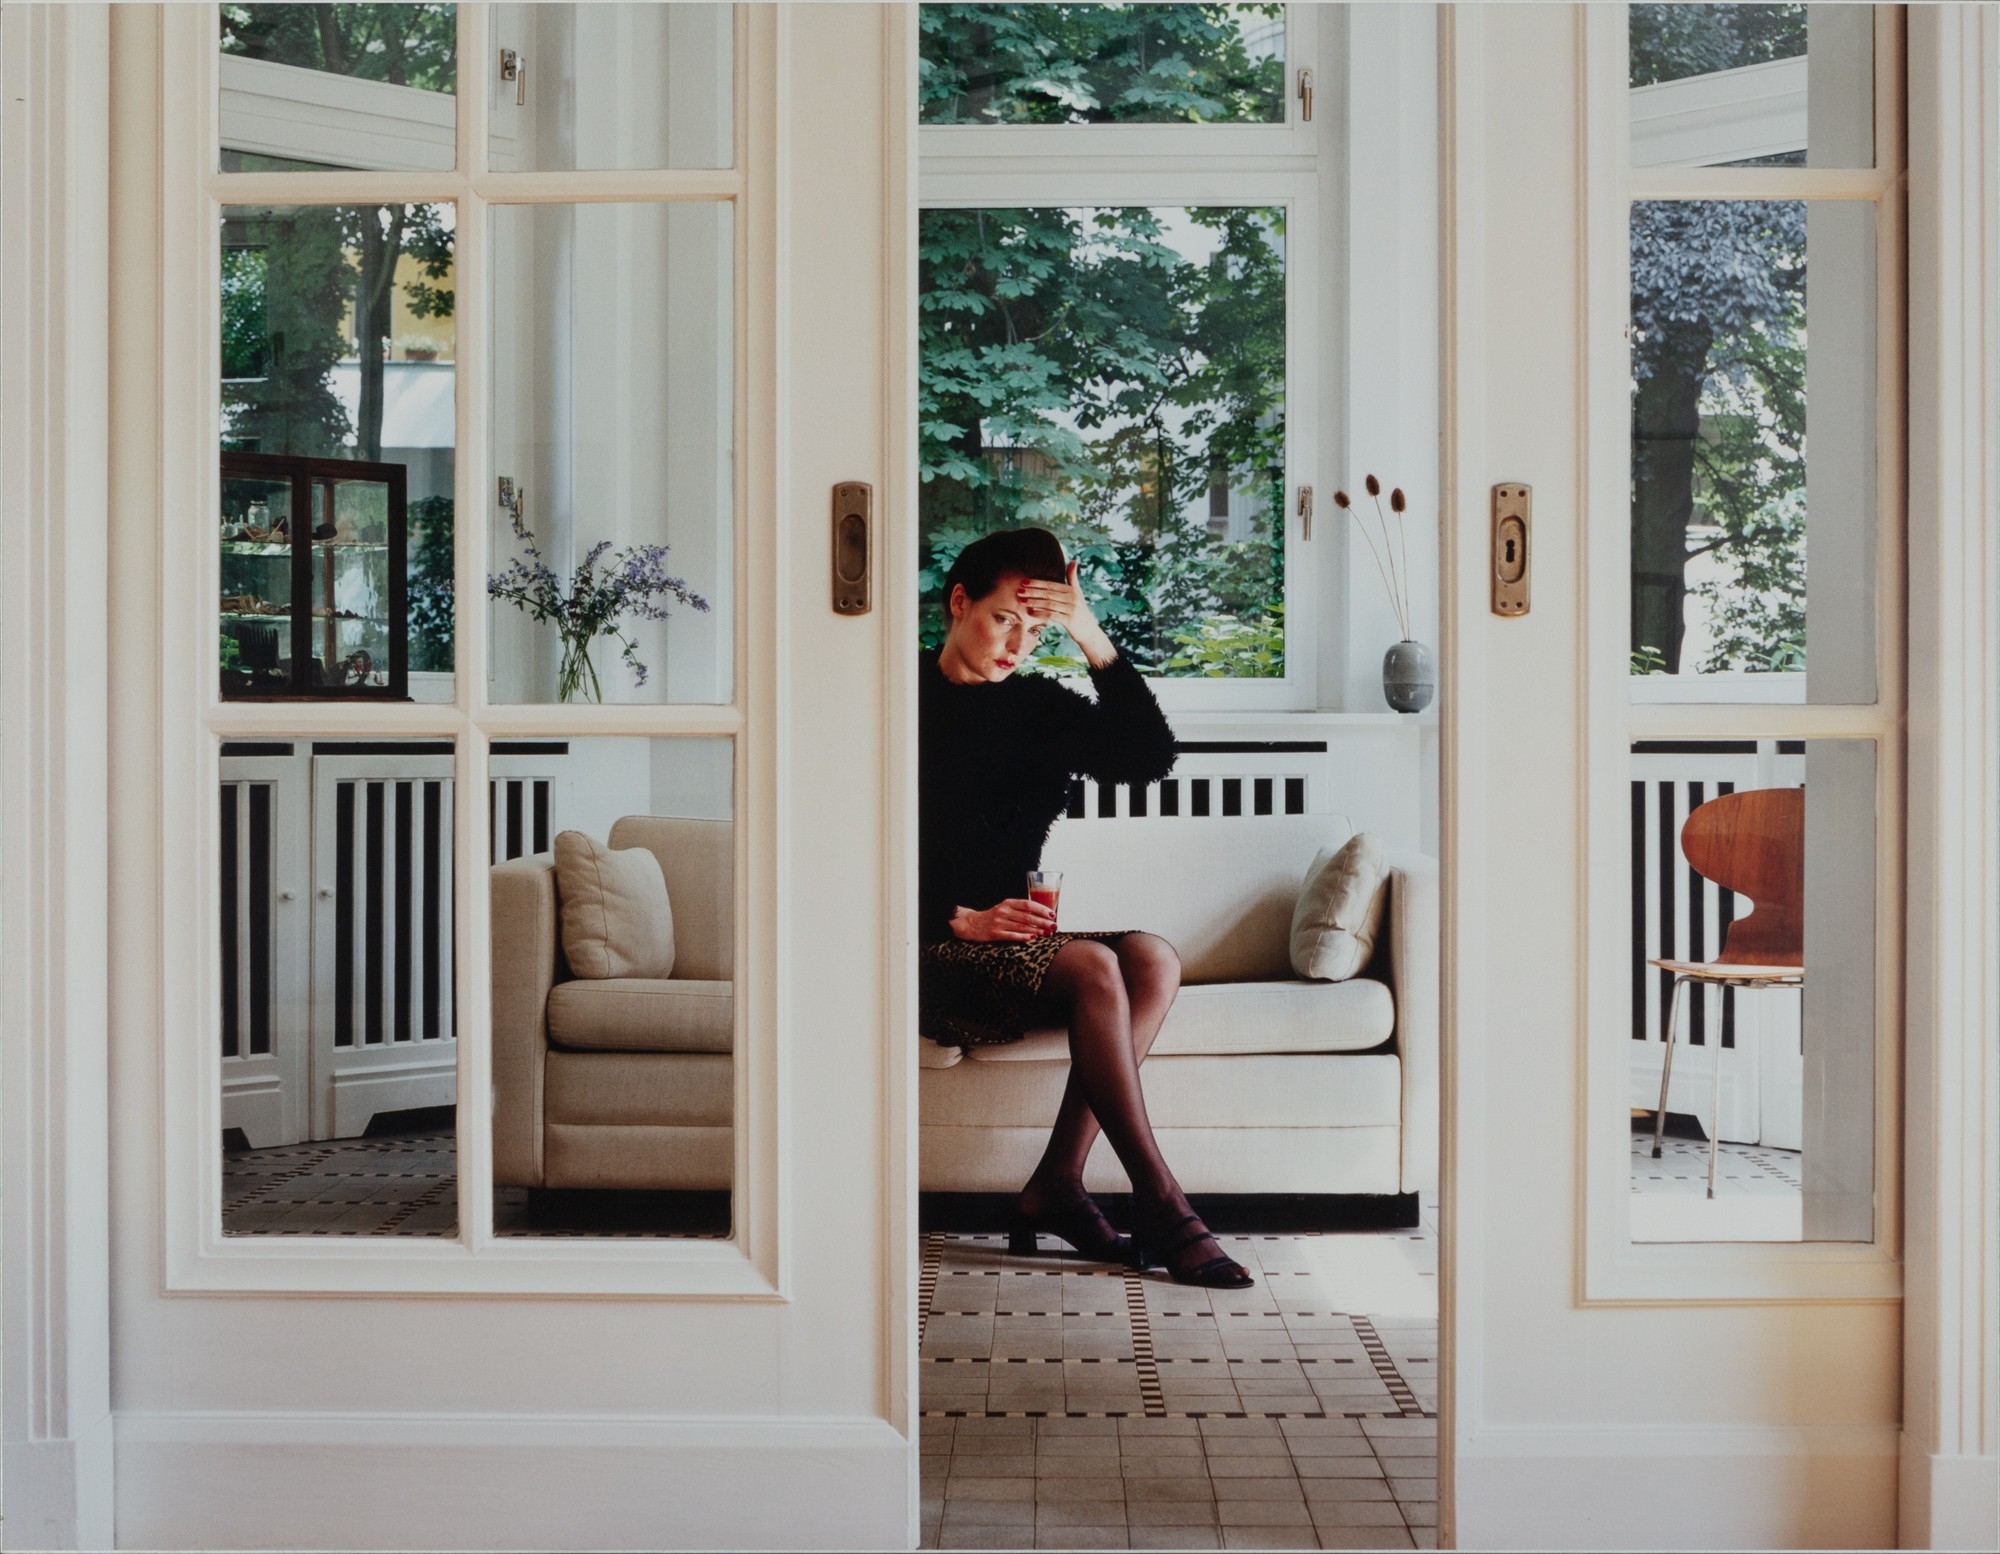 Untitled (Sliding glass doors) by Aino Kannisto, 2004